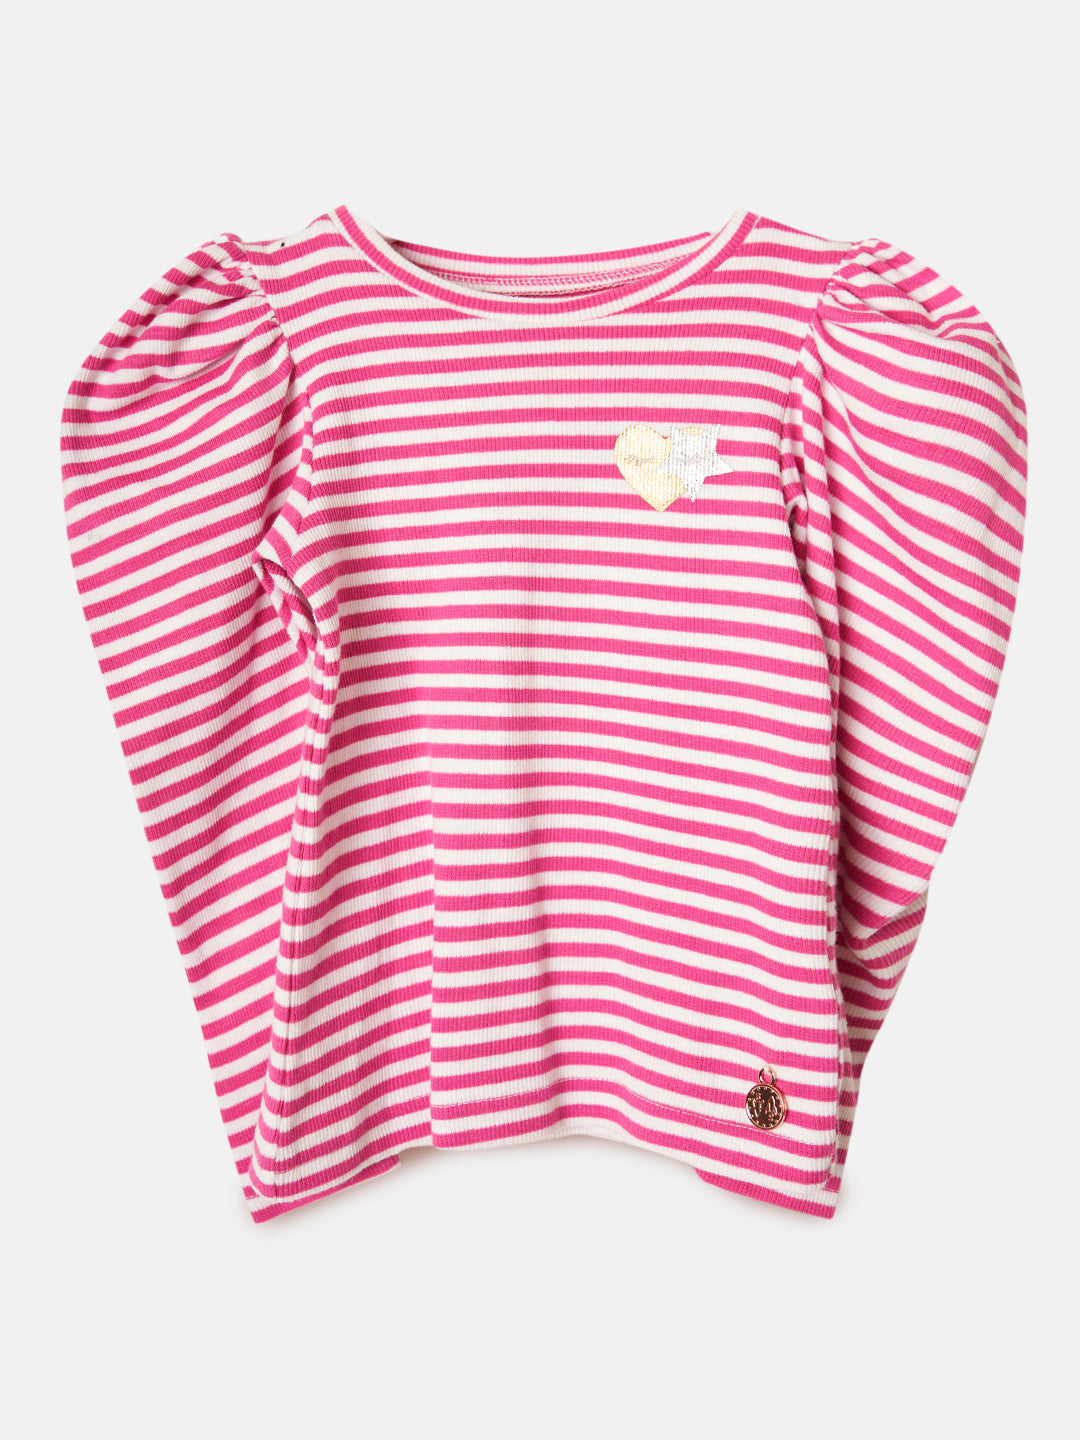 Girls Striped Full Sleeves Cotton Pink Top